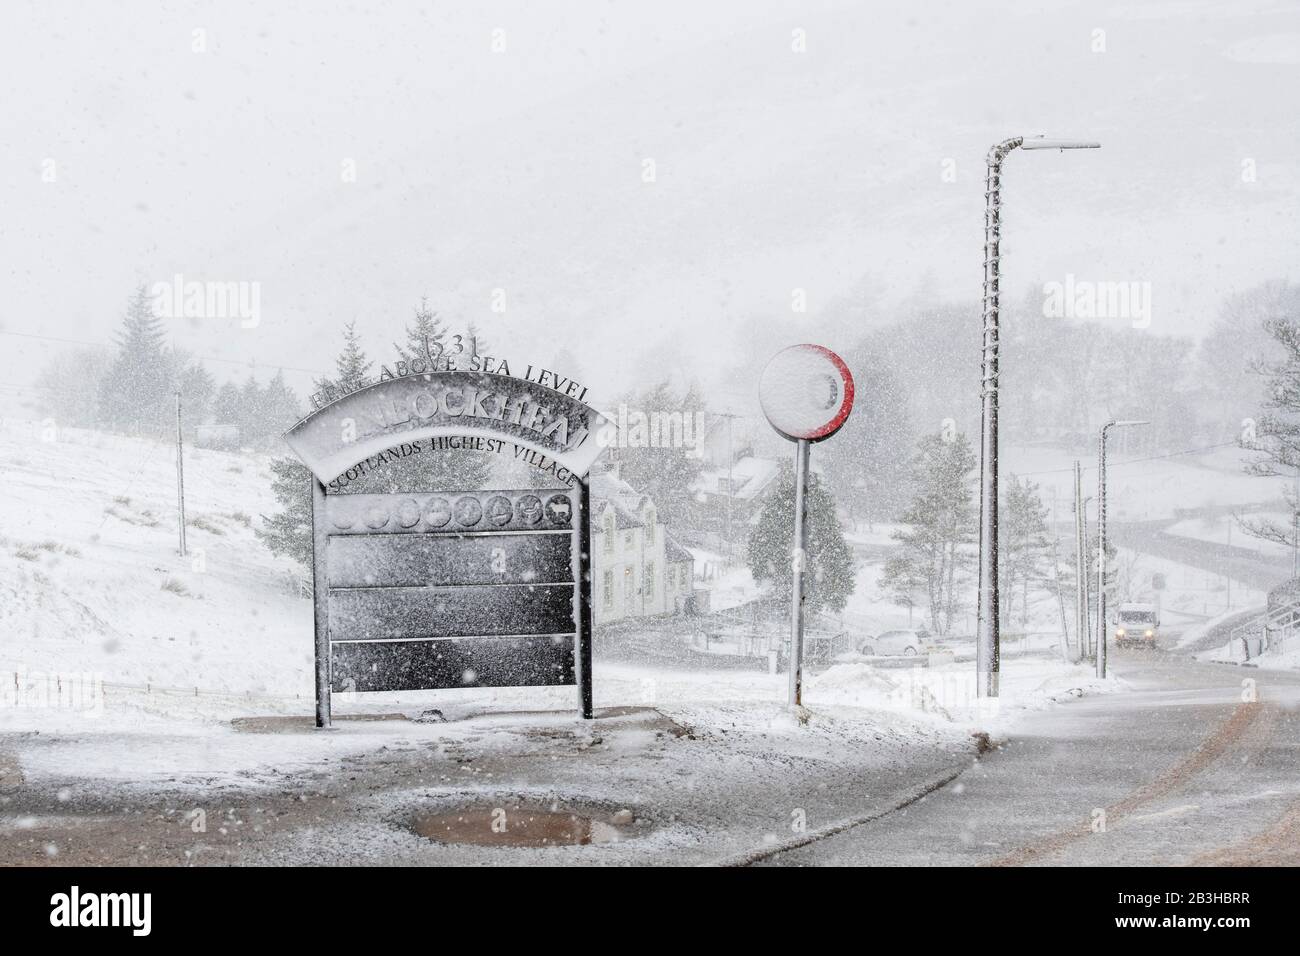 Wanlockhead village sign in the snow during Storm Jorge. February 2020. Scotlands highest village. Dumfries and Galloway, Scottish borders, Scotland Stock Photo